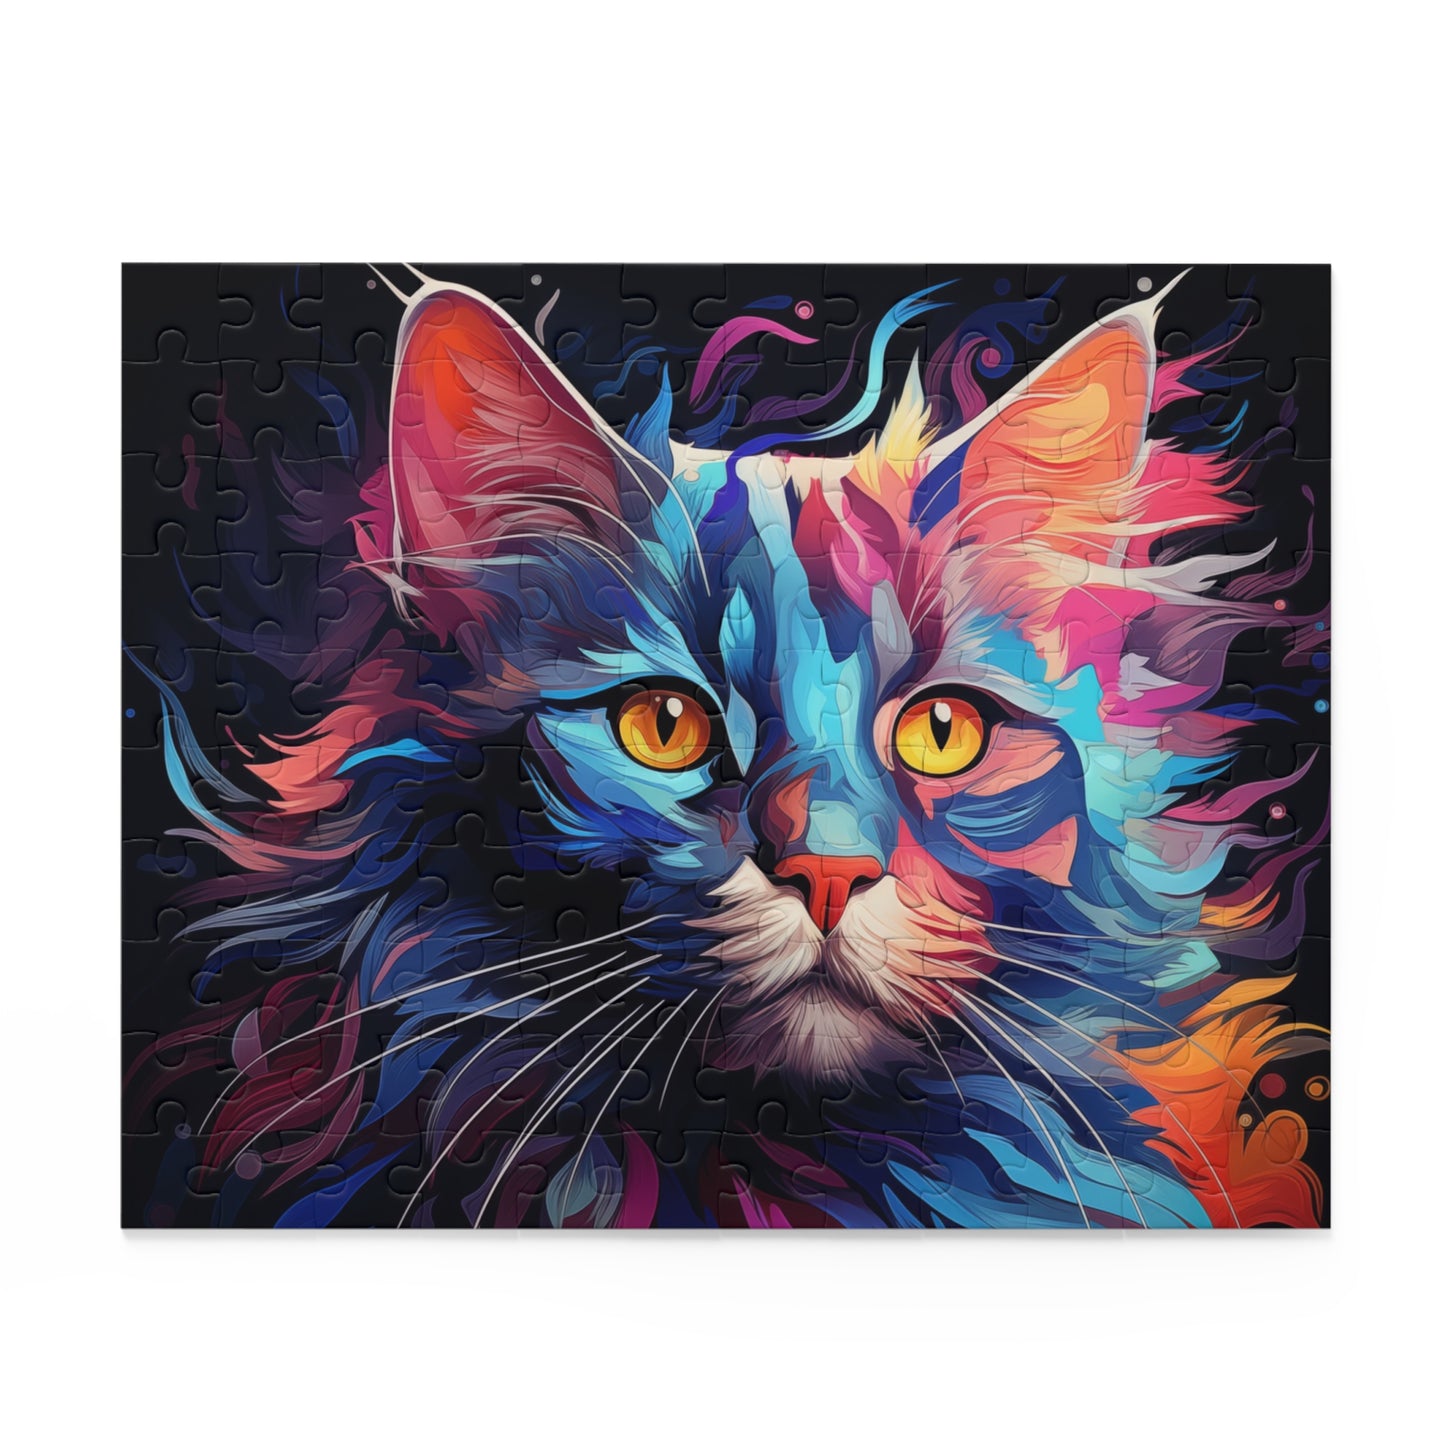 Abstract Cat Oil Paint Jigsaw Puzzle Adult Birthday Business Jigsaw Puzzle Gift for Him Funny Humorous Indoor Outdoor Game Gift For Her Online-2